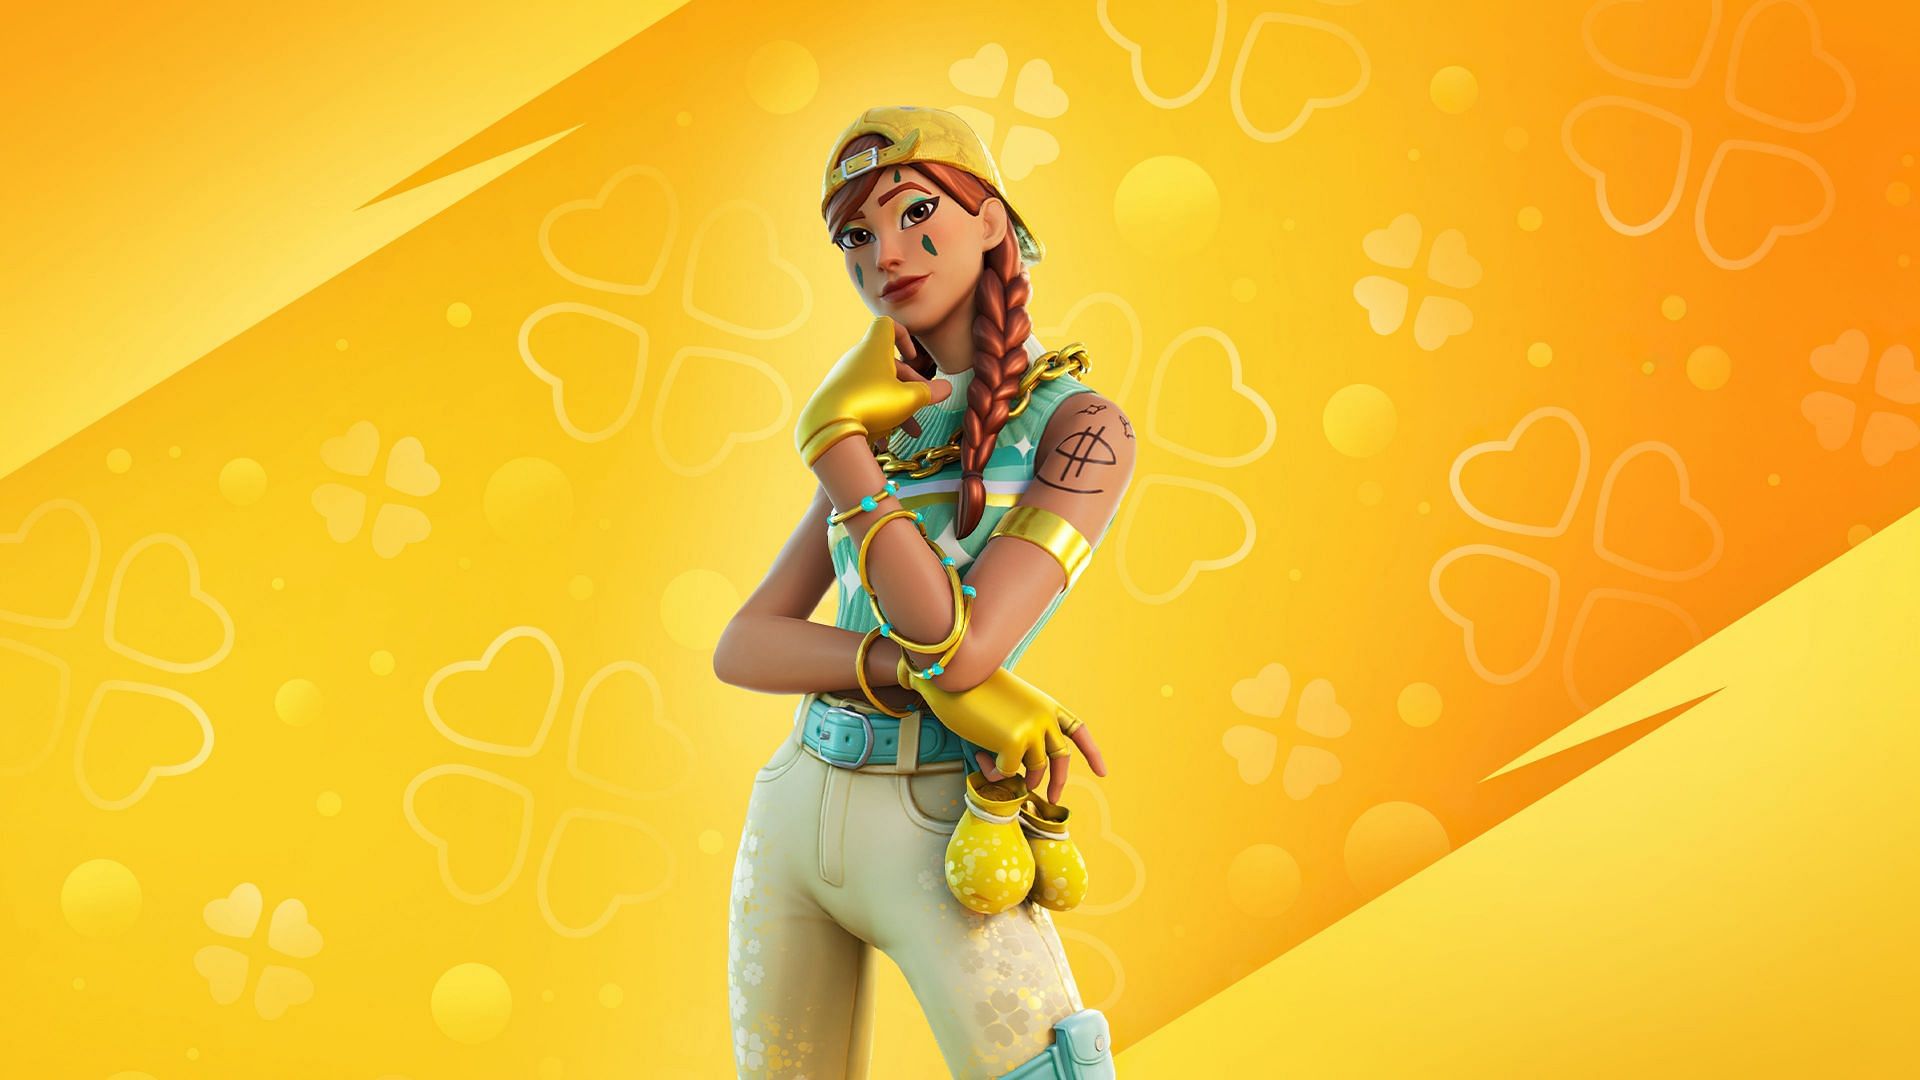 Aura has been among the most popular Fortnite skins for a few years (Image via Epic Games)